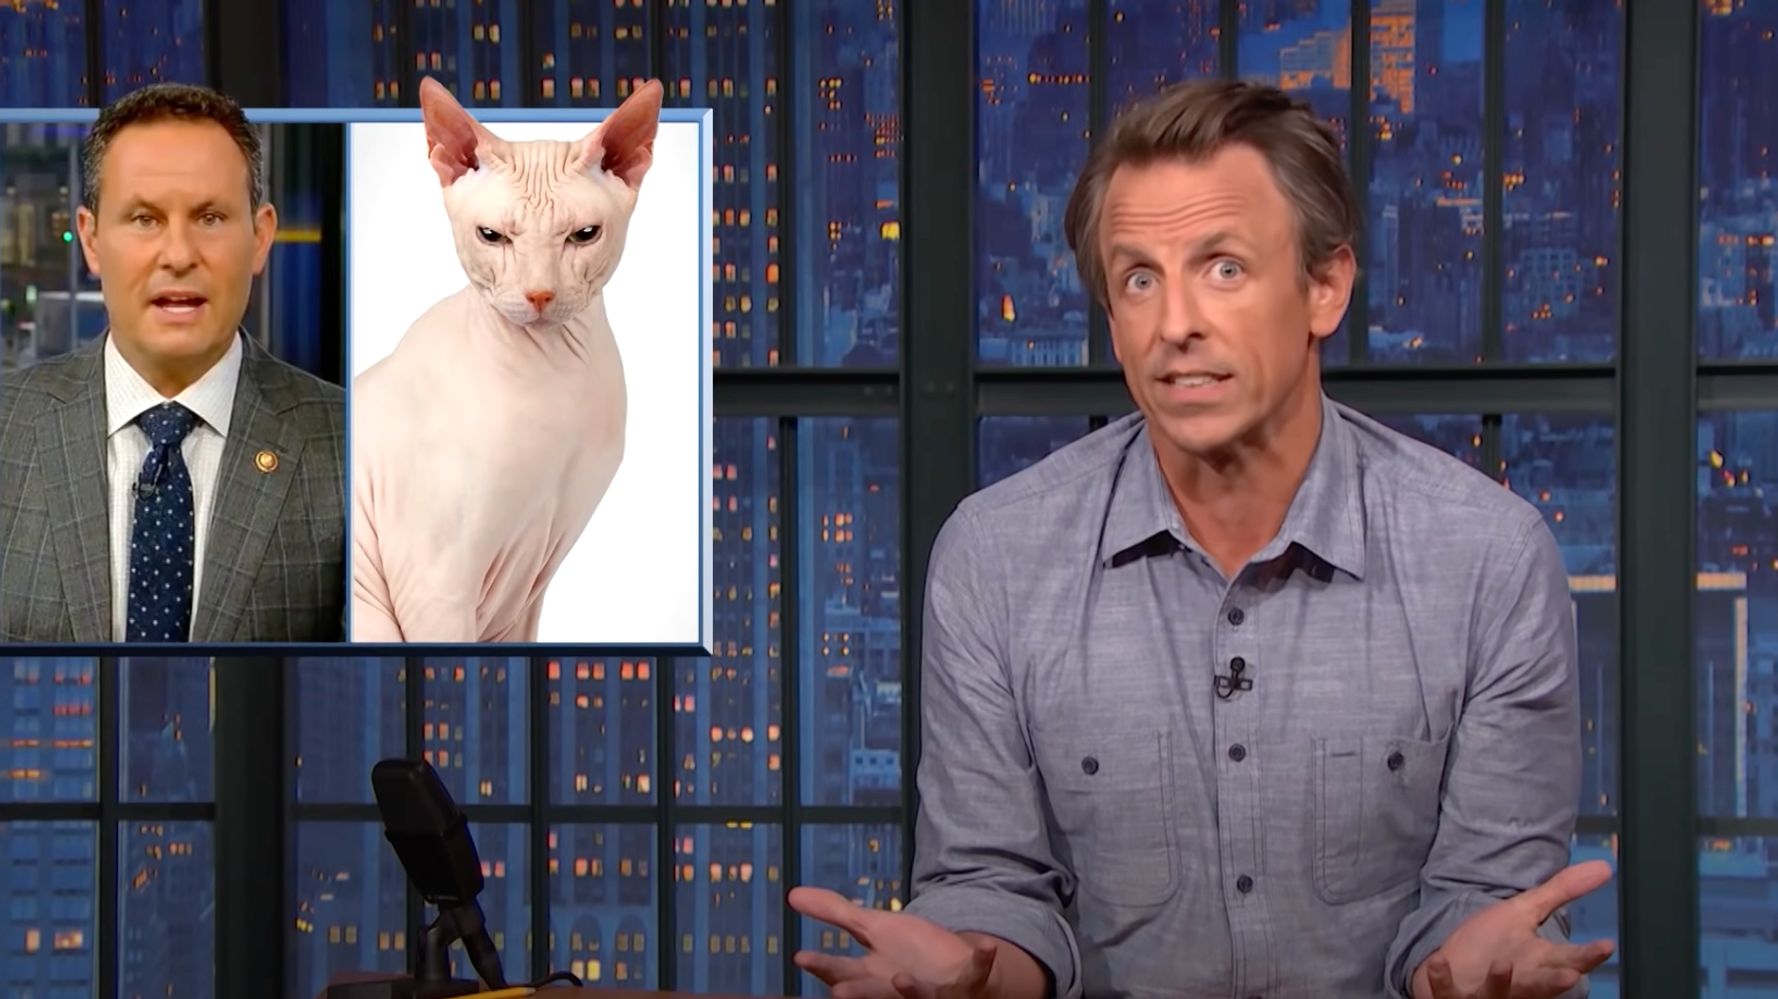 Seth Meyers Imagines What's Next For 'Dumber And Dumber' Fox News Pseudoscience